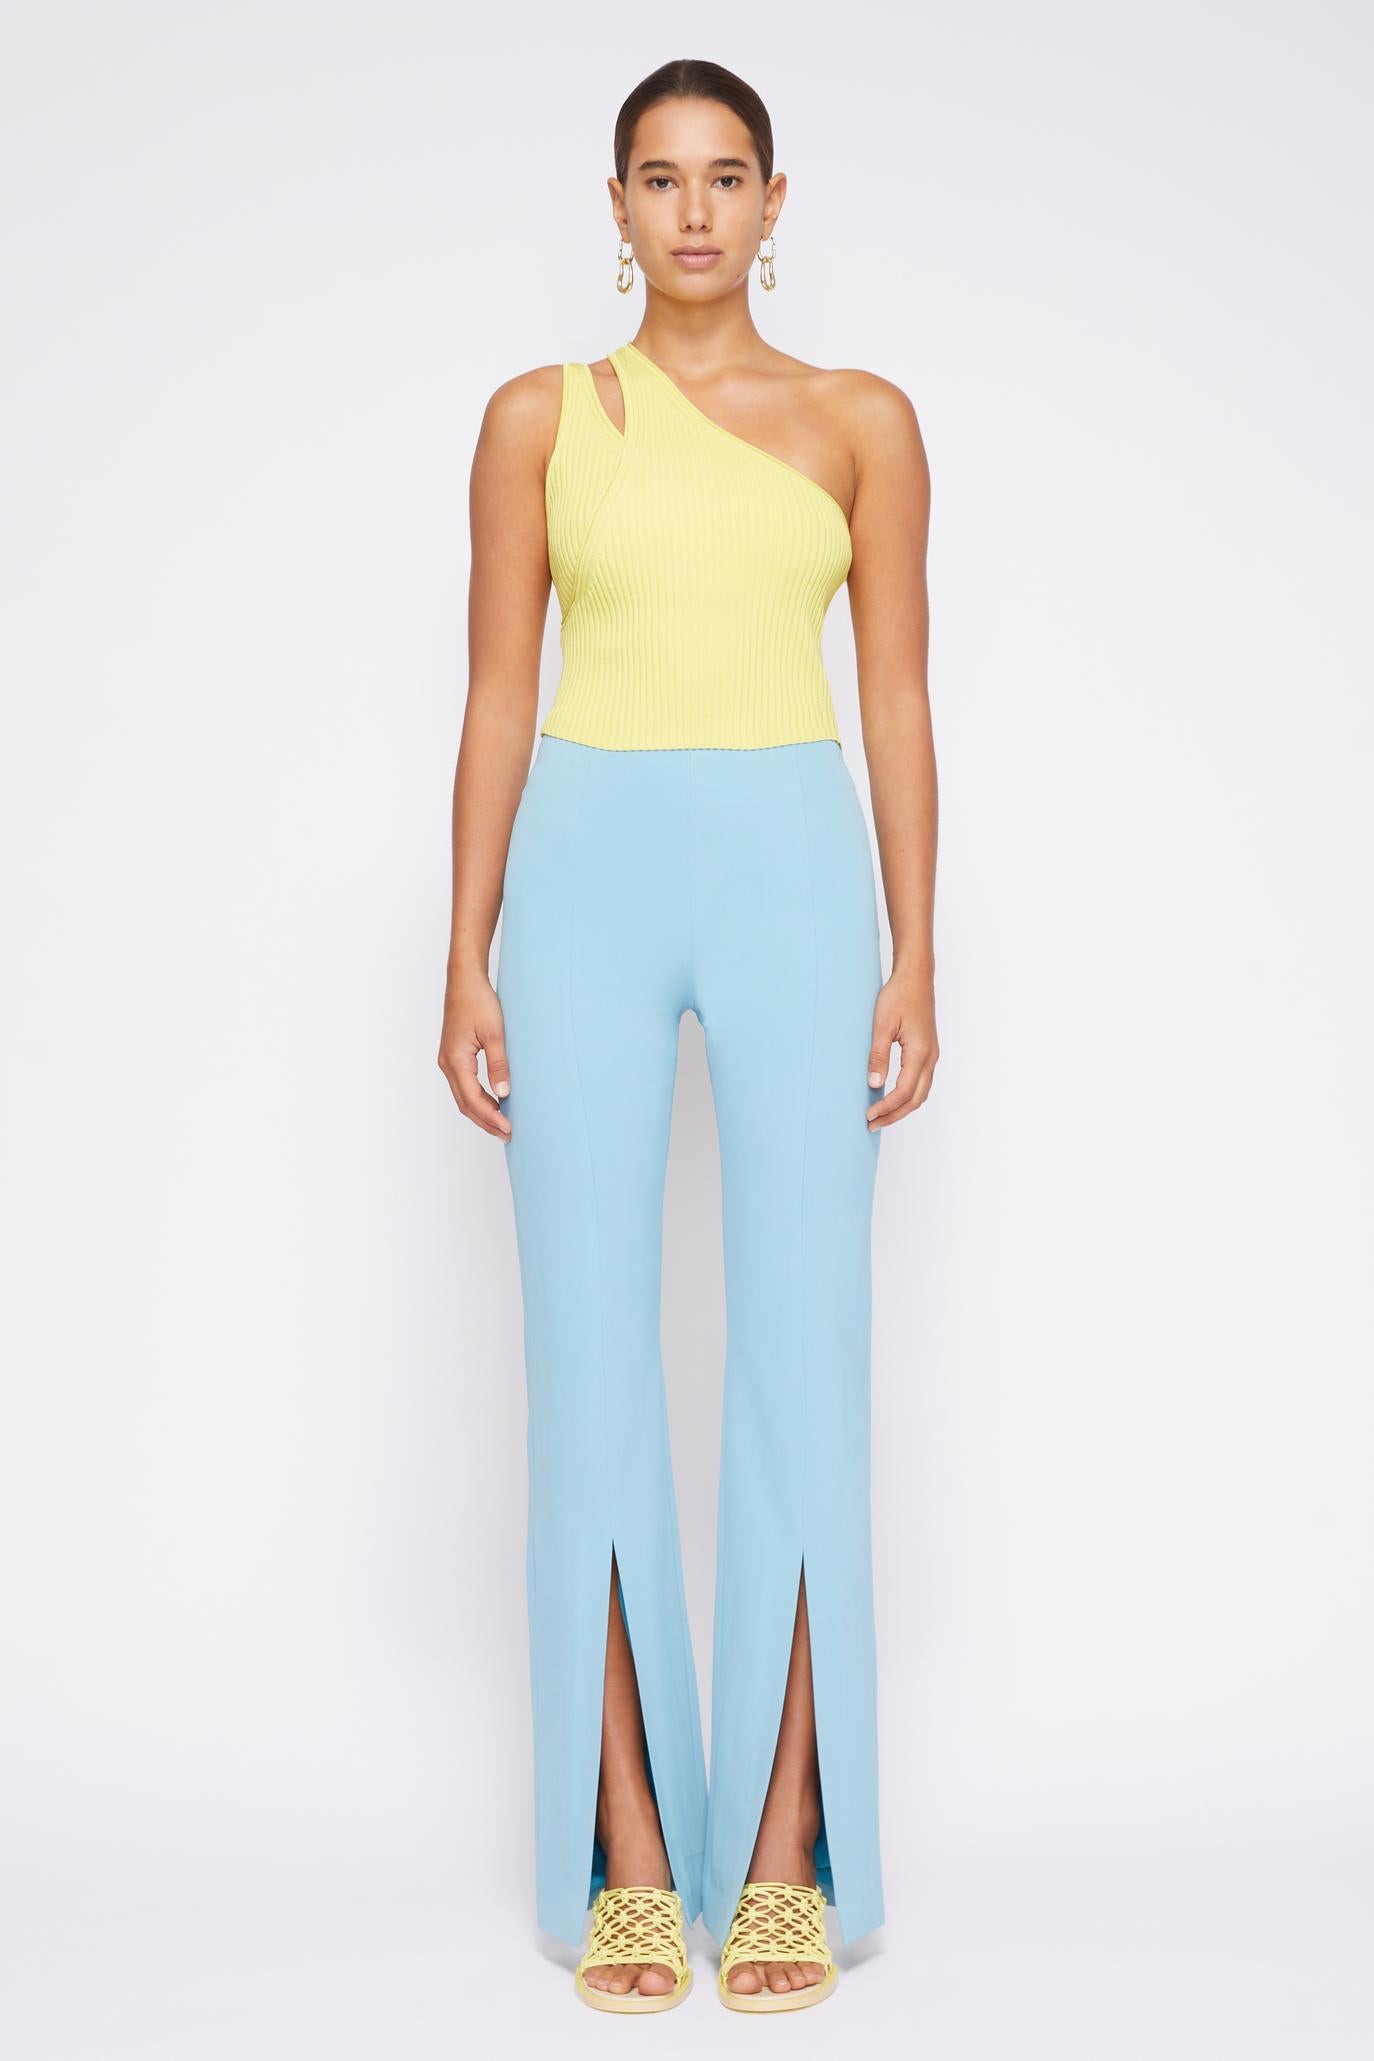 Chase Technical Cocktail Crepe Slit Front Pant